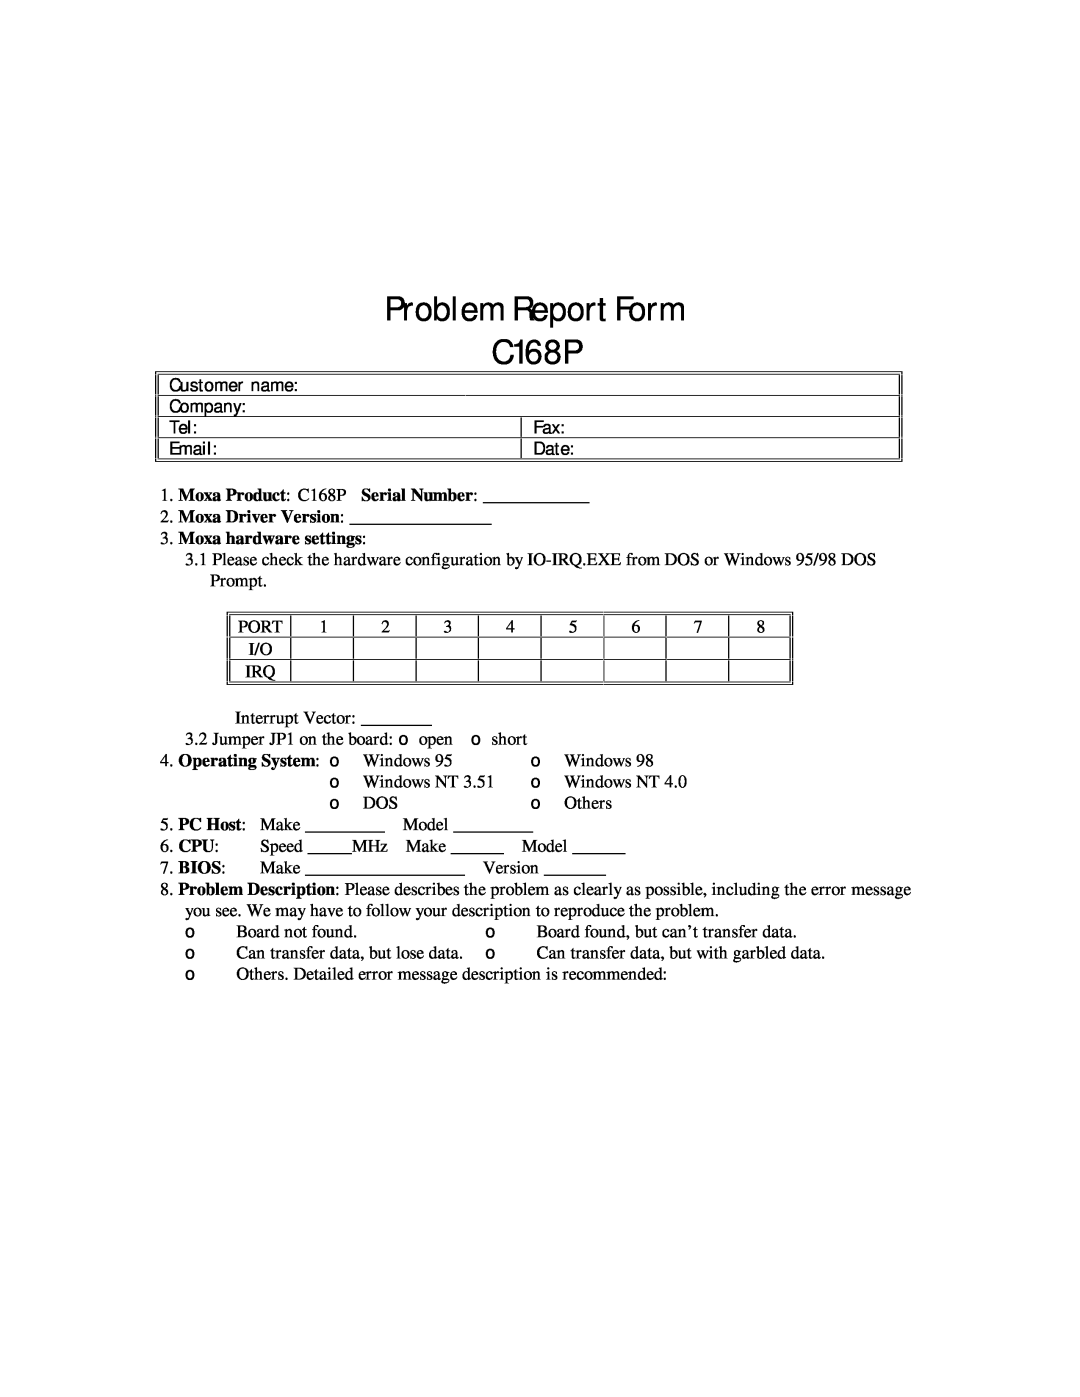 Moxa Technologies Problem Report Form C168P, Customer name Company Tel Fax EmailDate, Moxa hardware settings, PC Host 